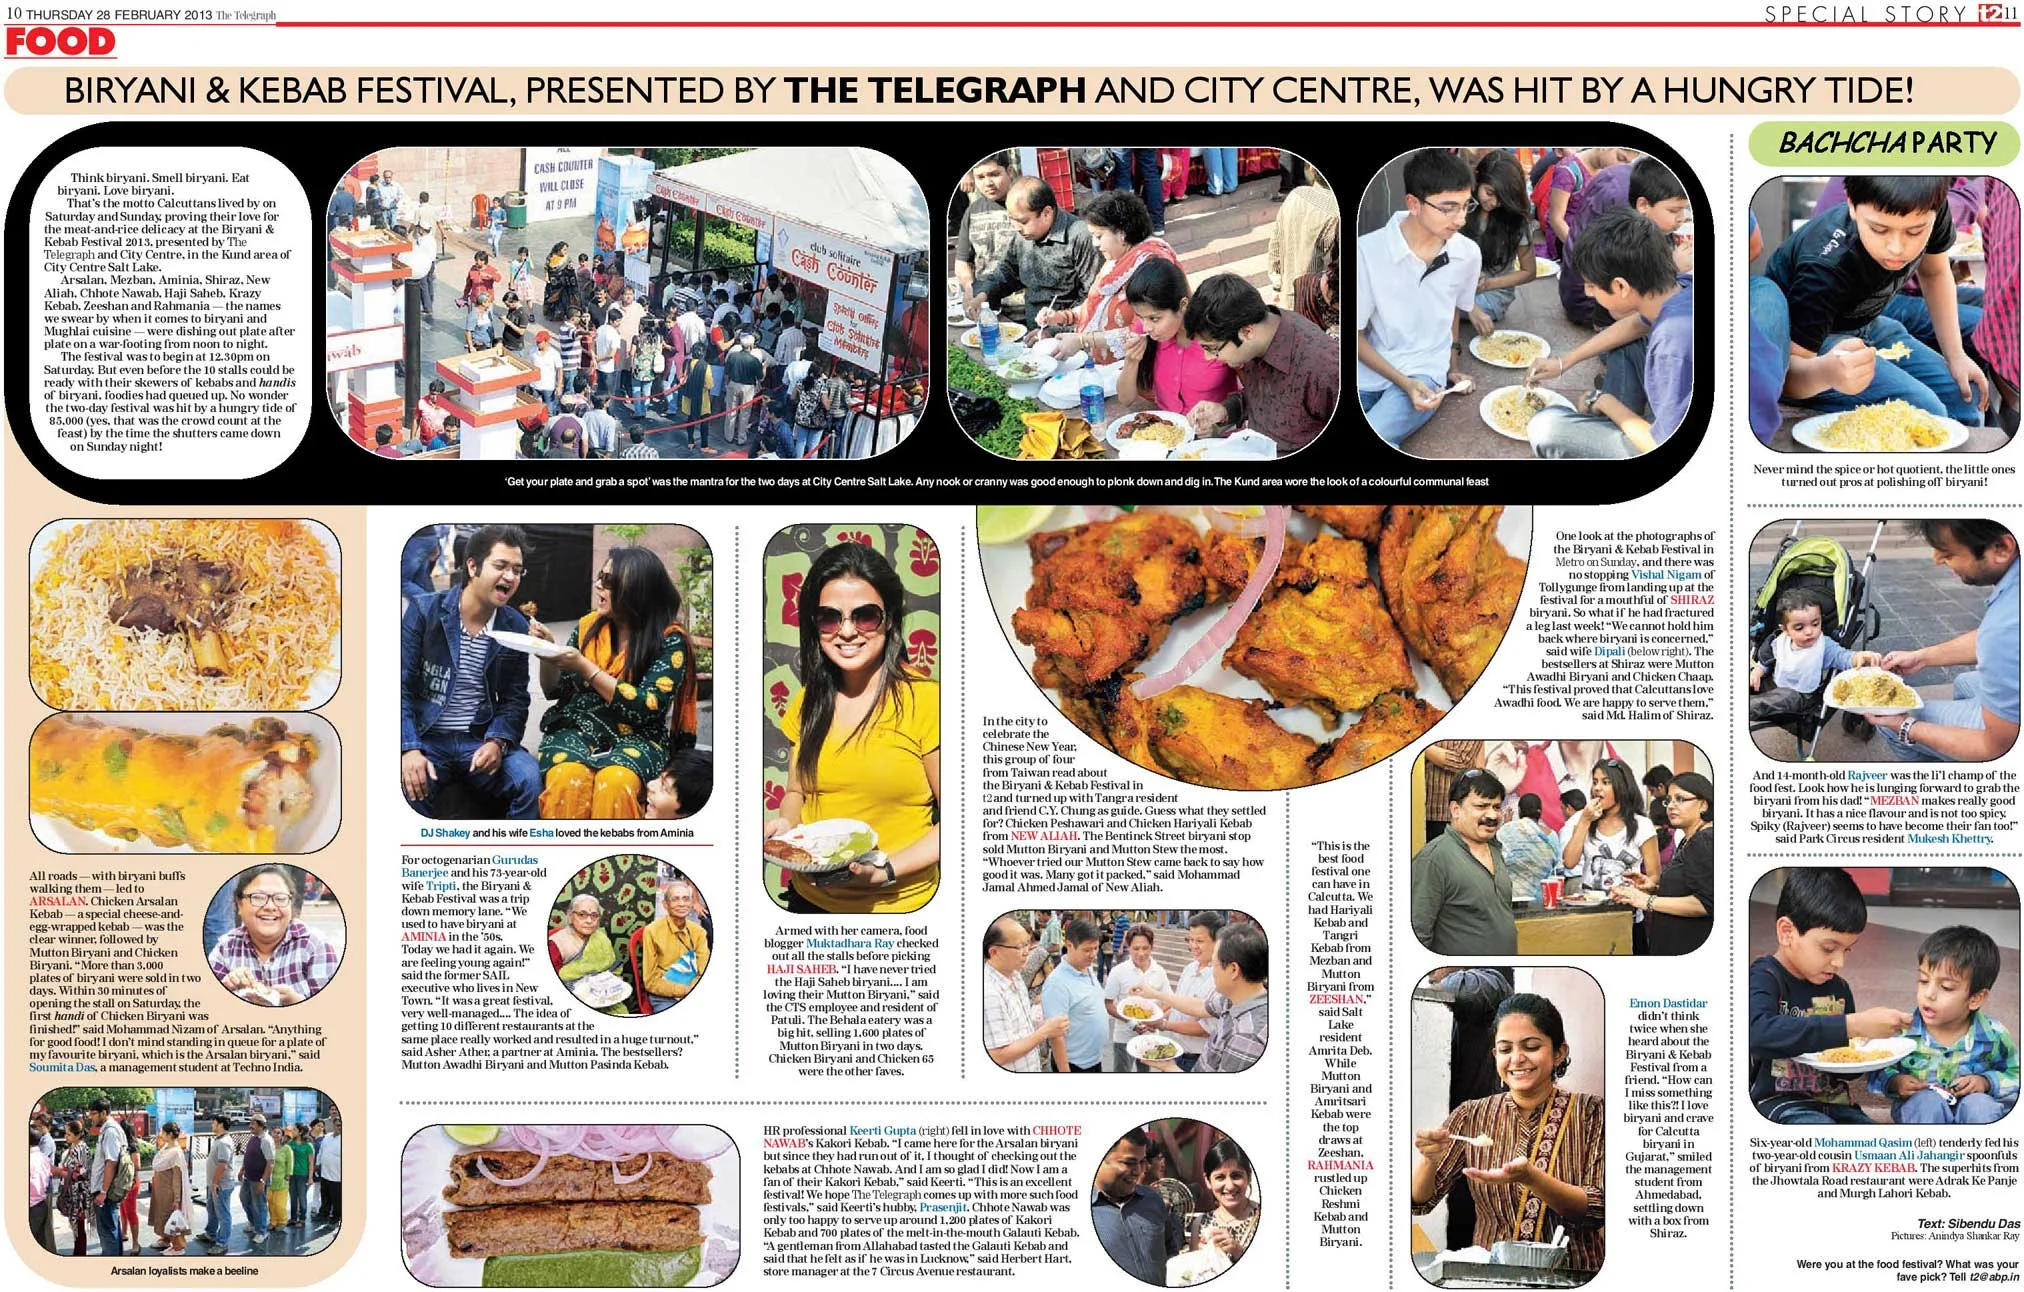 Biryani & Kebab Festival presented at City Centre was hit by a hungry tide!